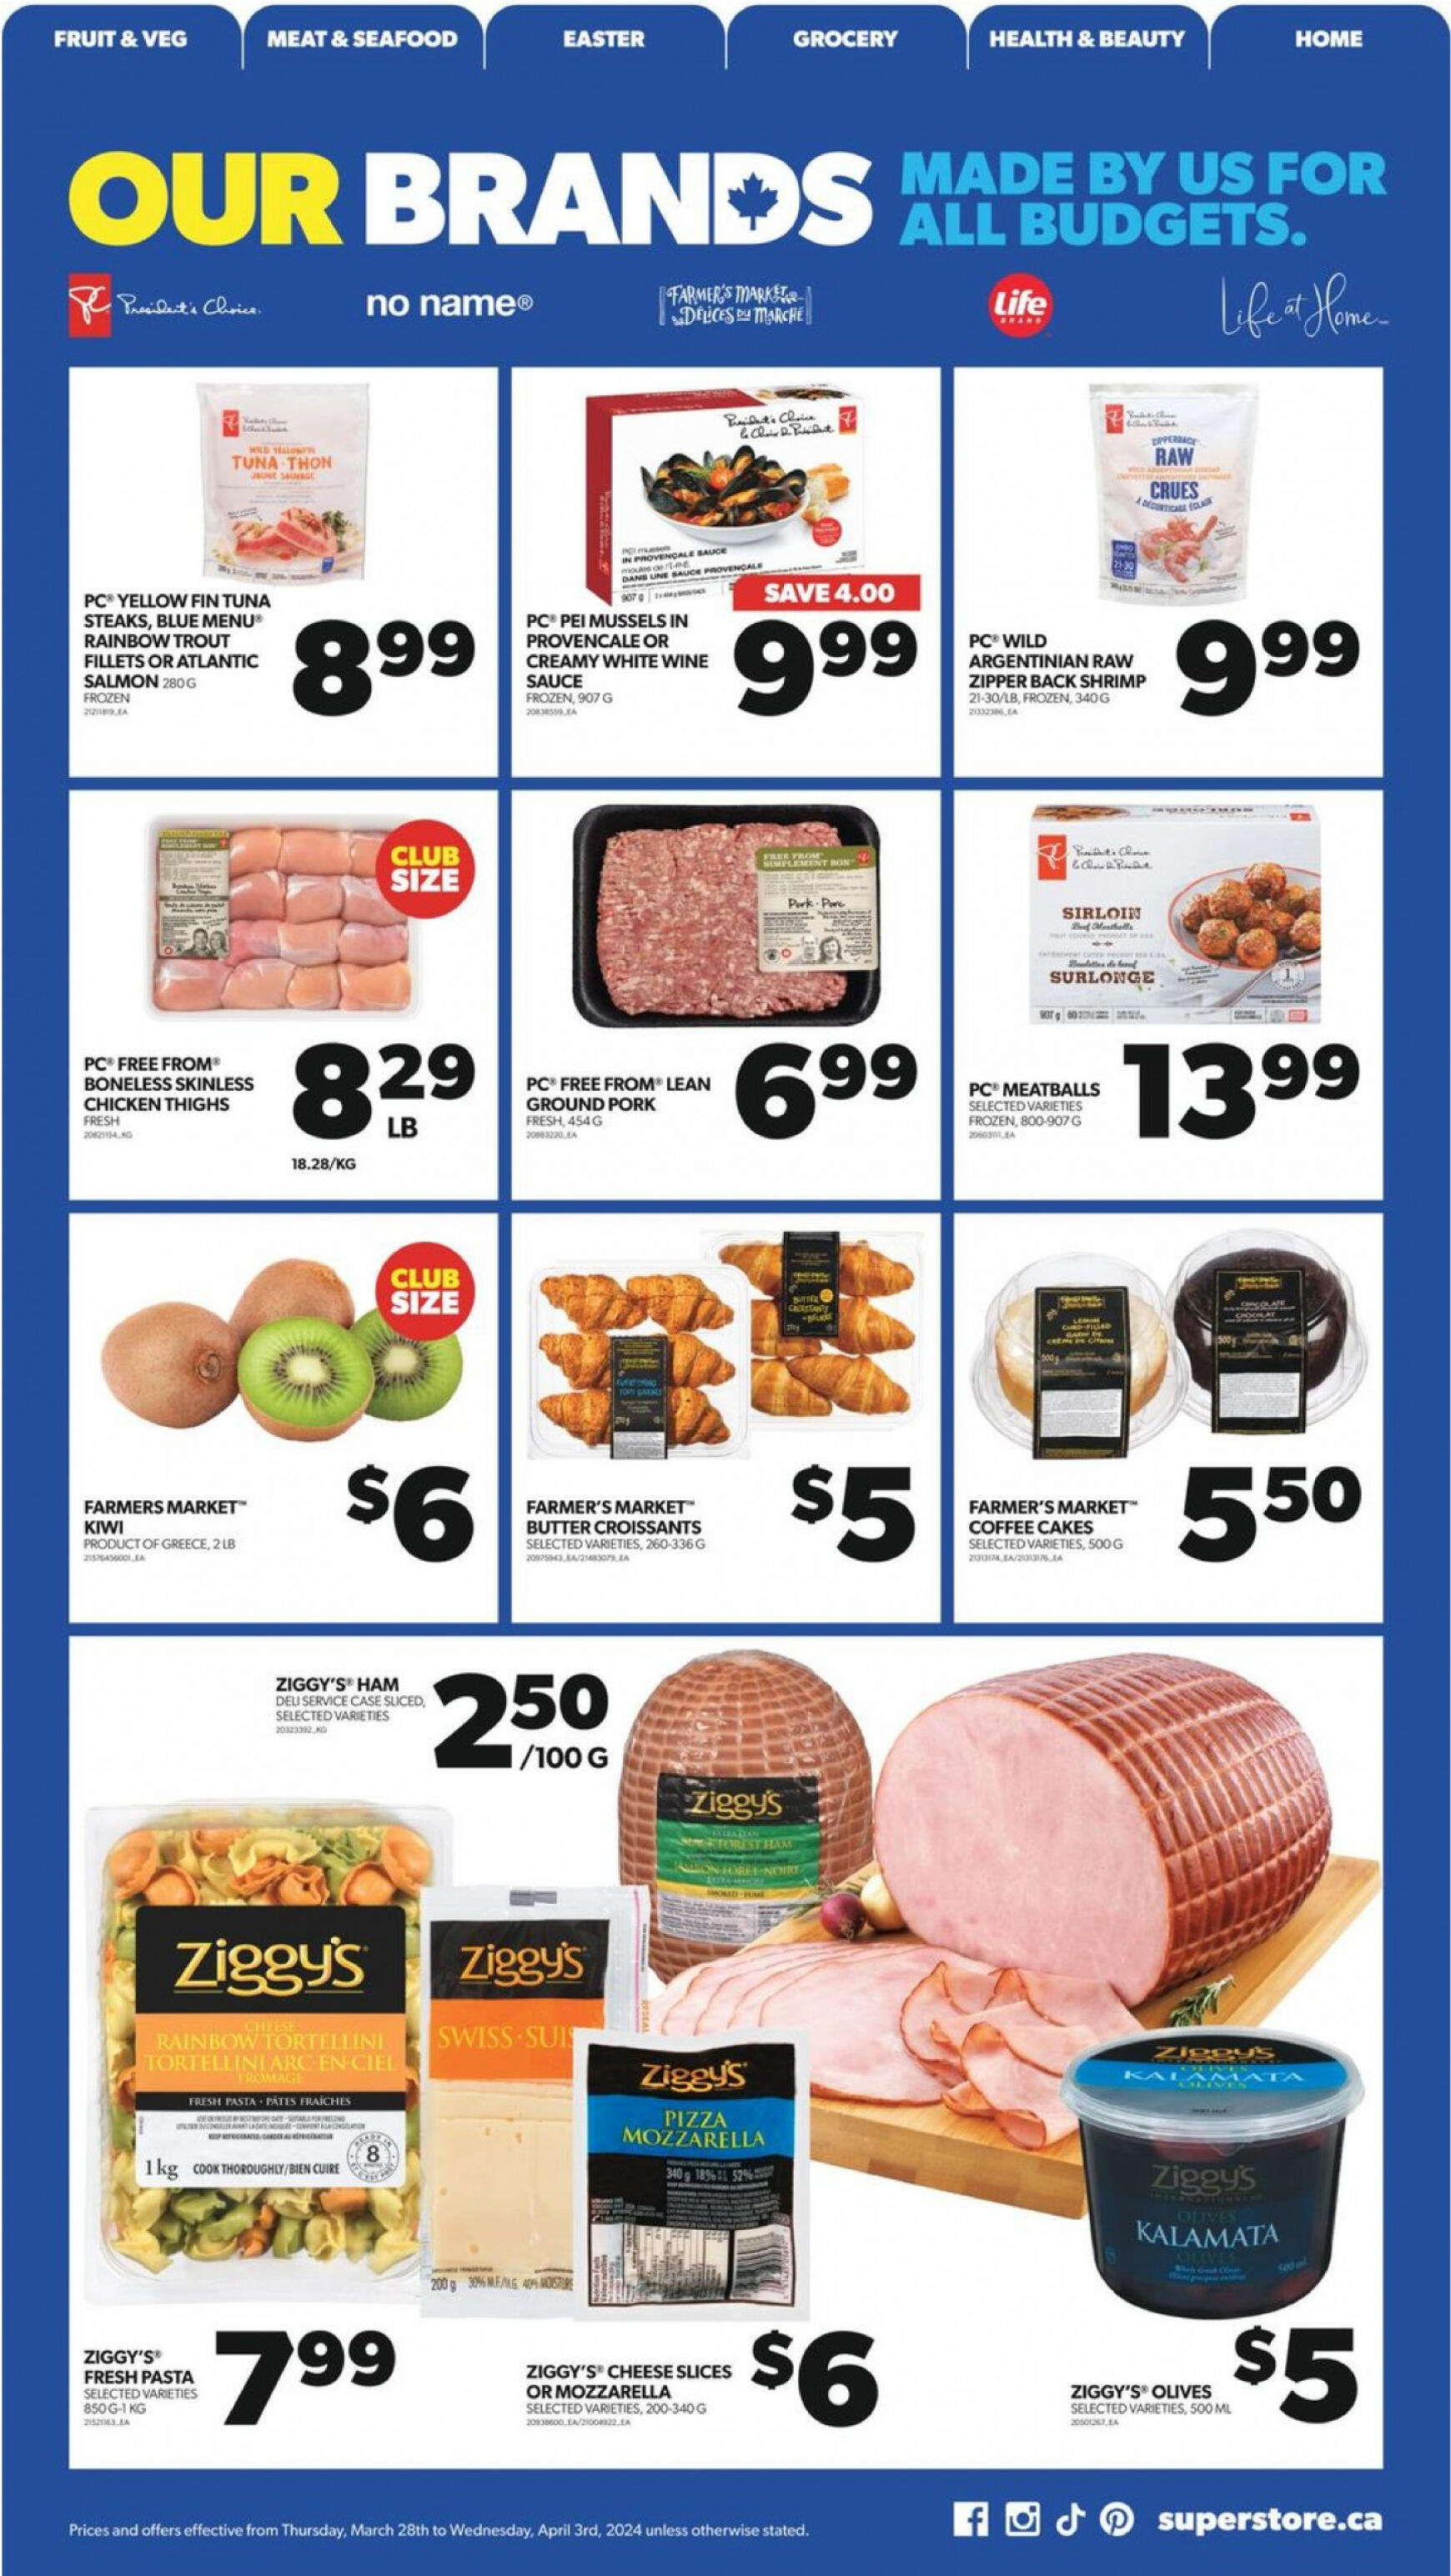 real-canadian-superstore - Real Canadian Superstore flyer current 28.03. - 03.04. - page: 15